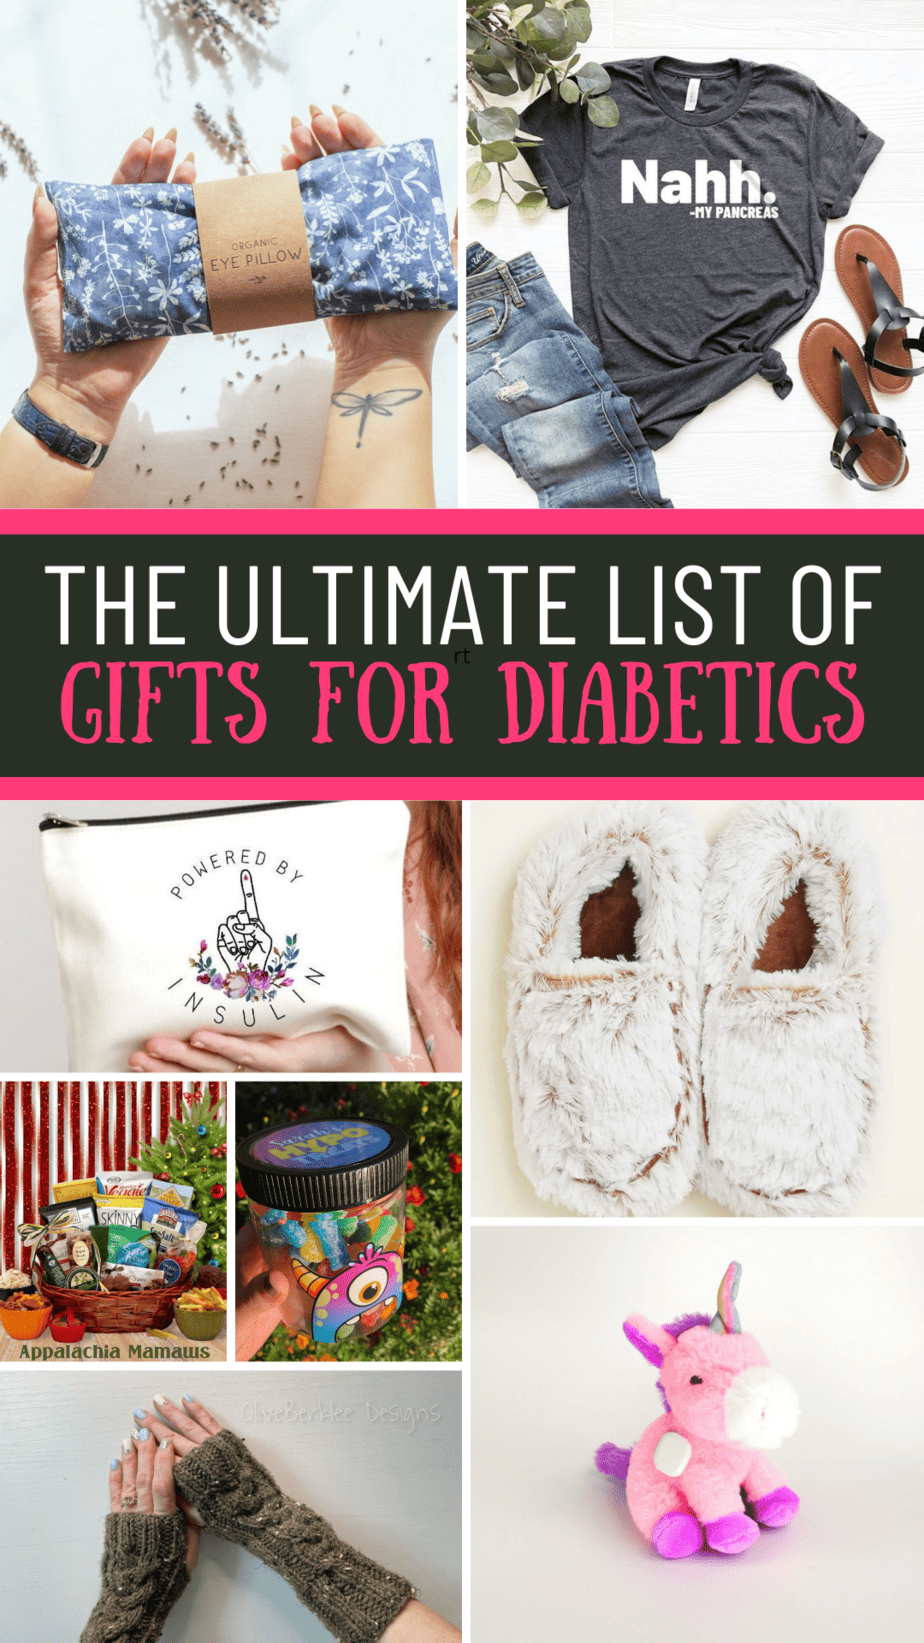 Looking for stocking stuffers for diabetics? We've got the ultimate gift guide to help you shop for a thoughtful present they'll love. 